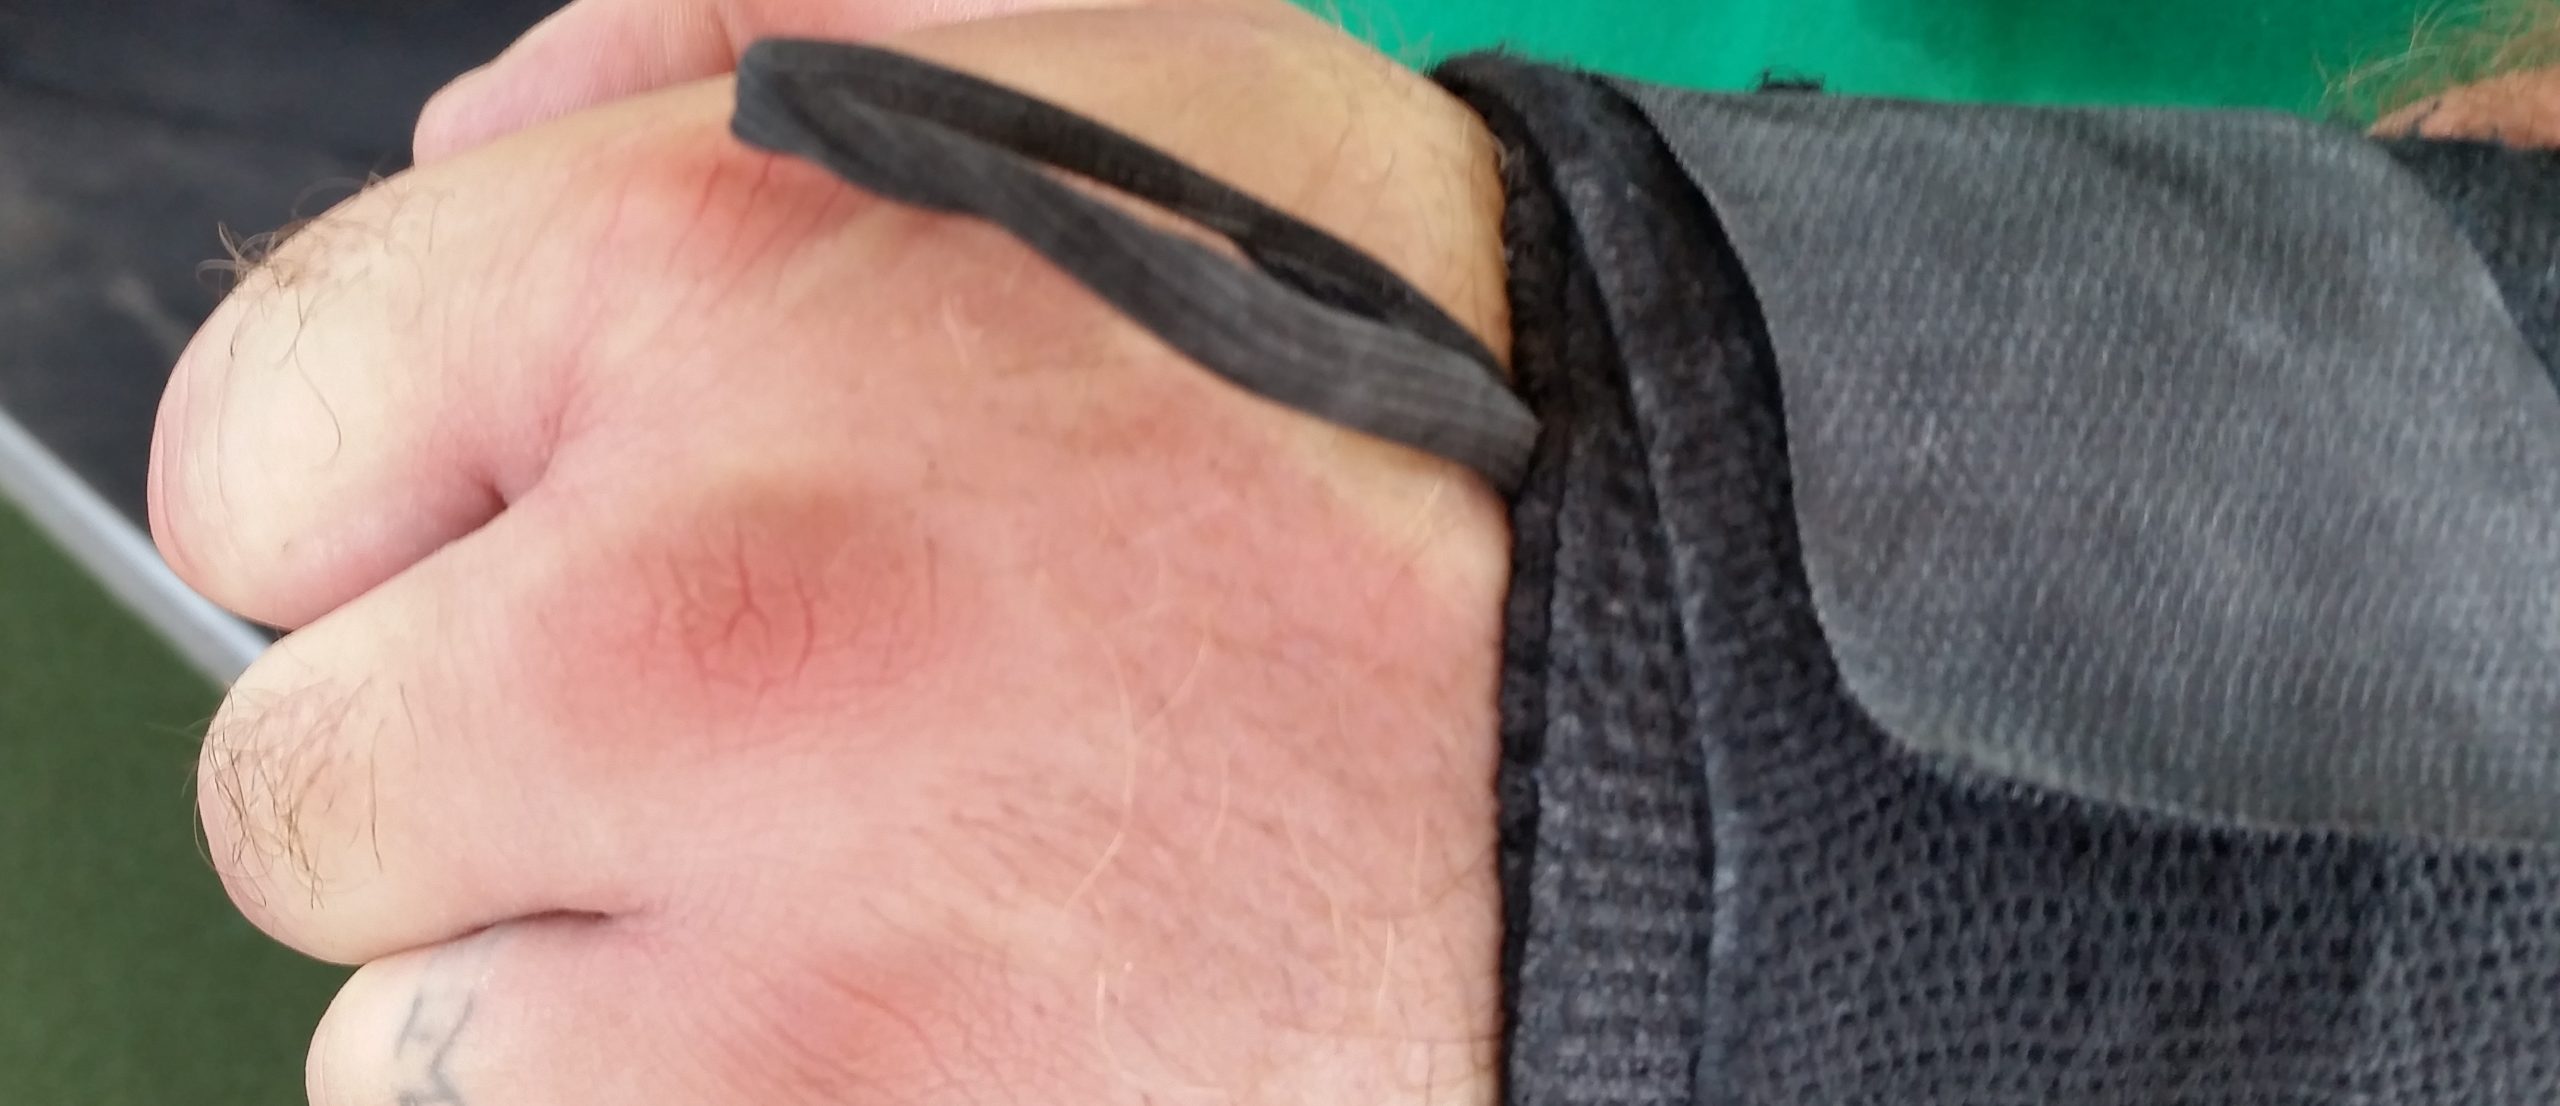 They're Called Wrist Wraps-How to Wrap Your Wrists Properly for Bigger Lifts